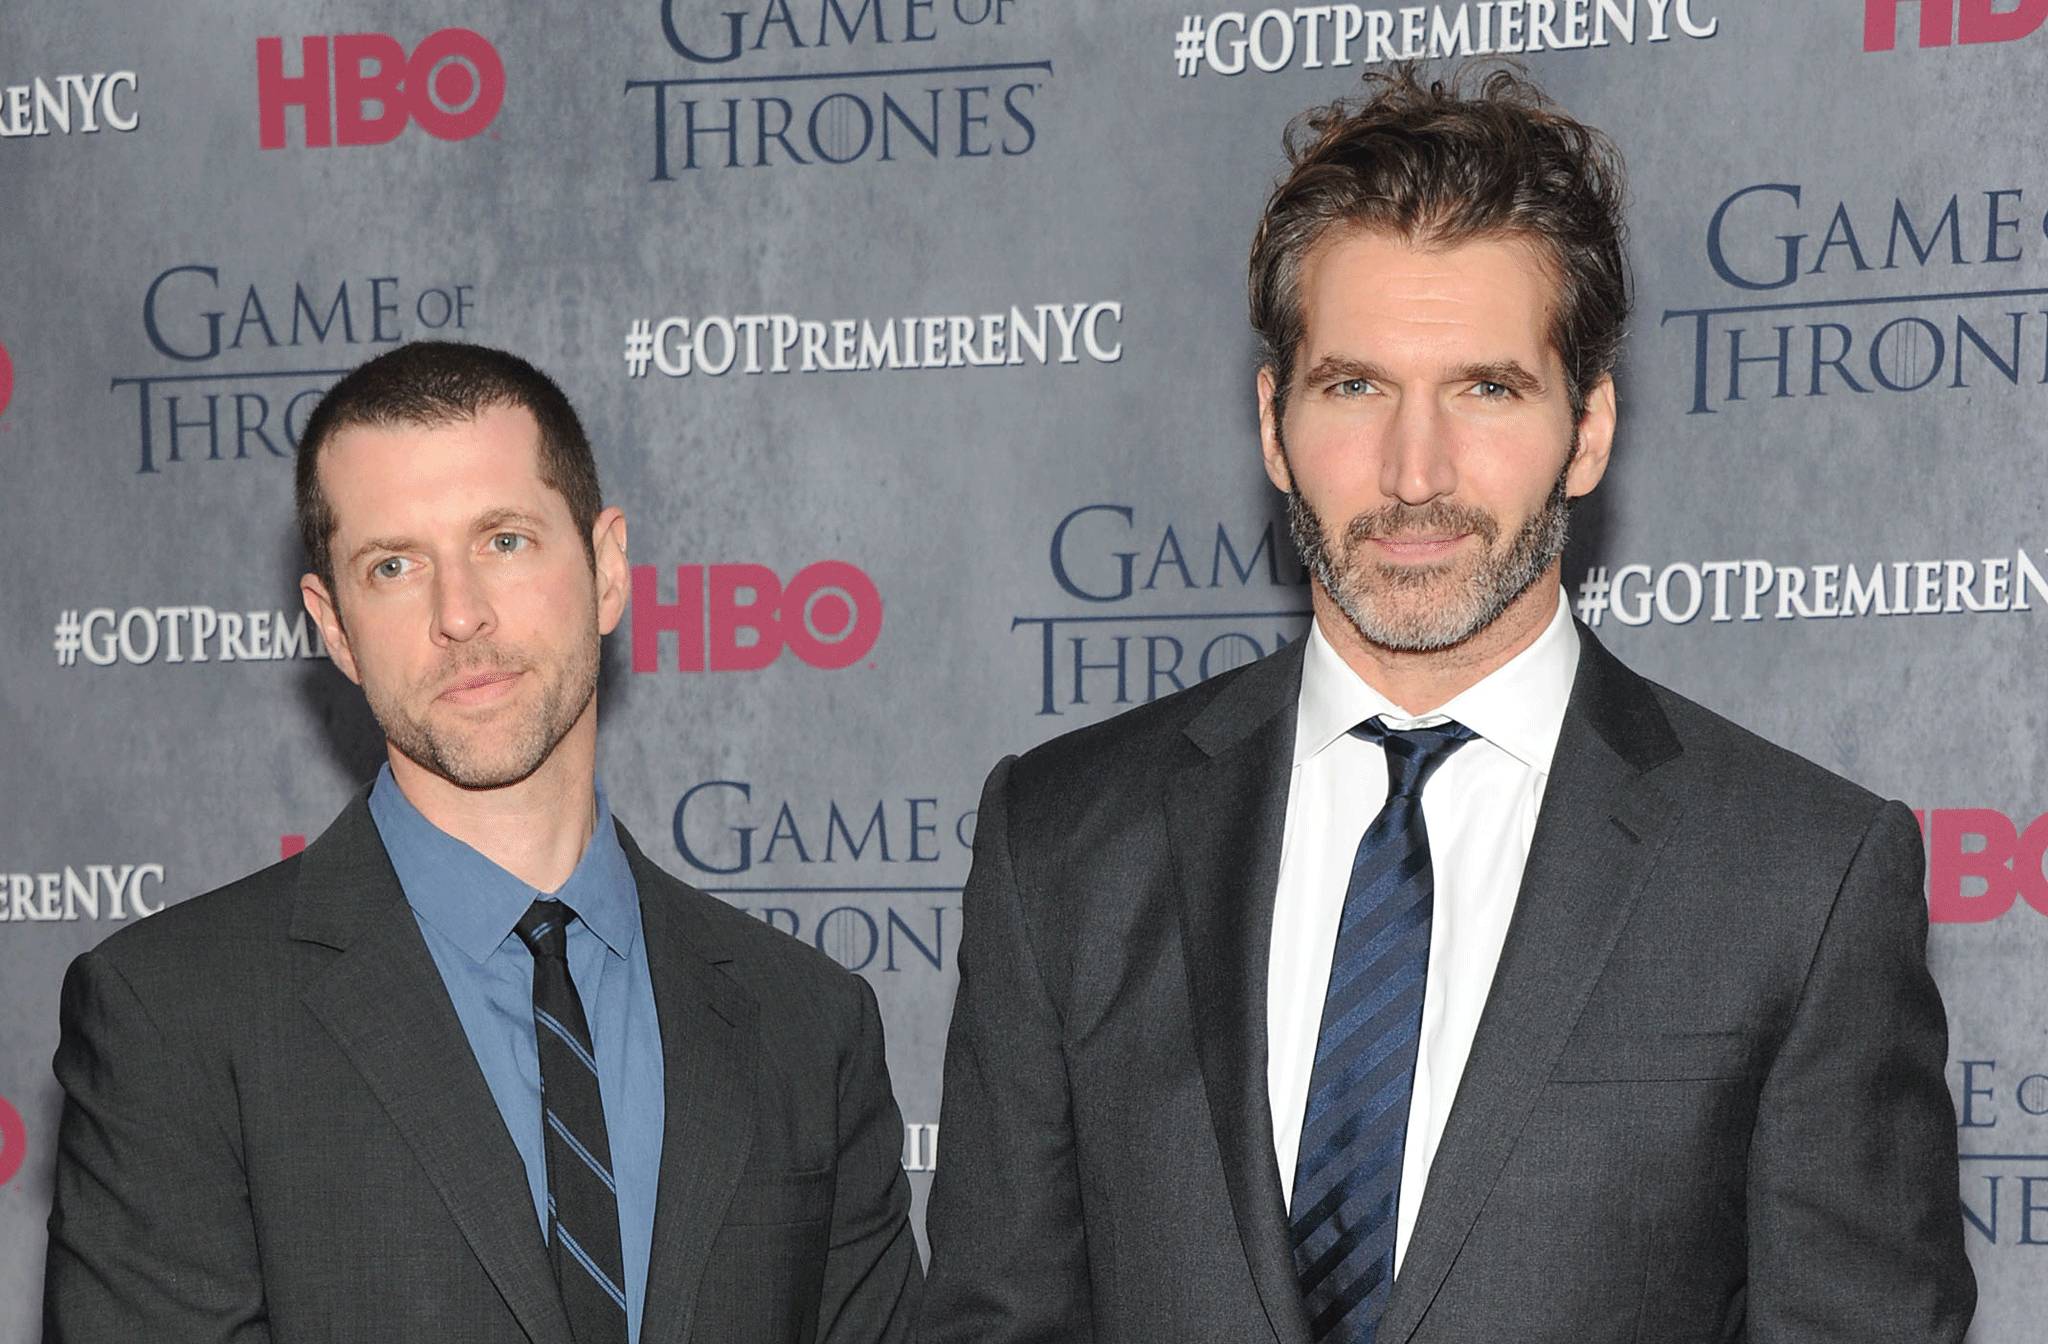 David Benioff and DB Weiss lied in order to get ‘Game of Thrones’ of the ground